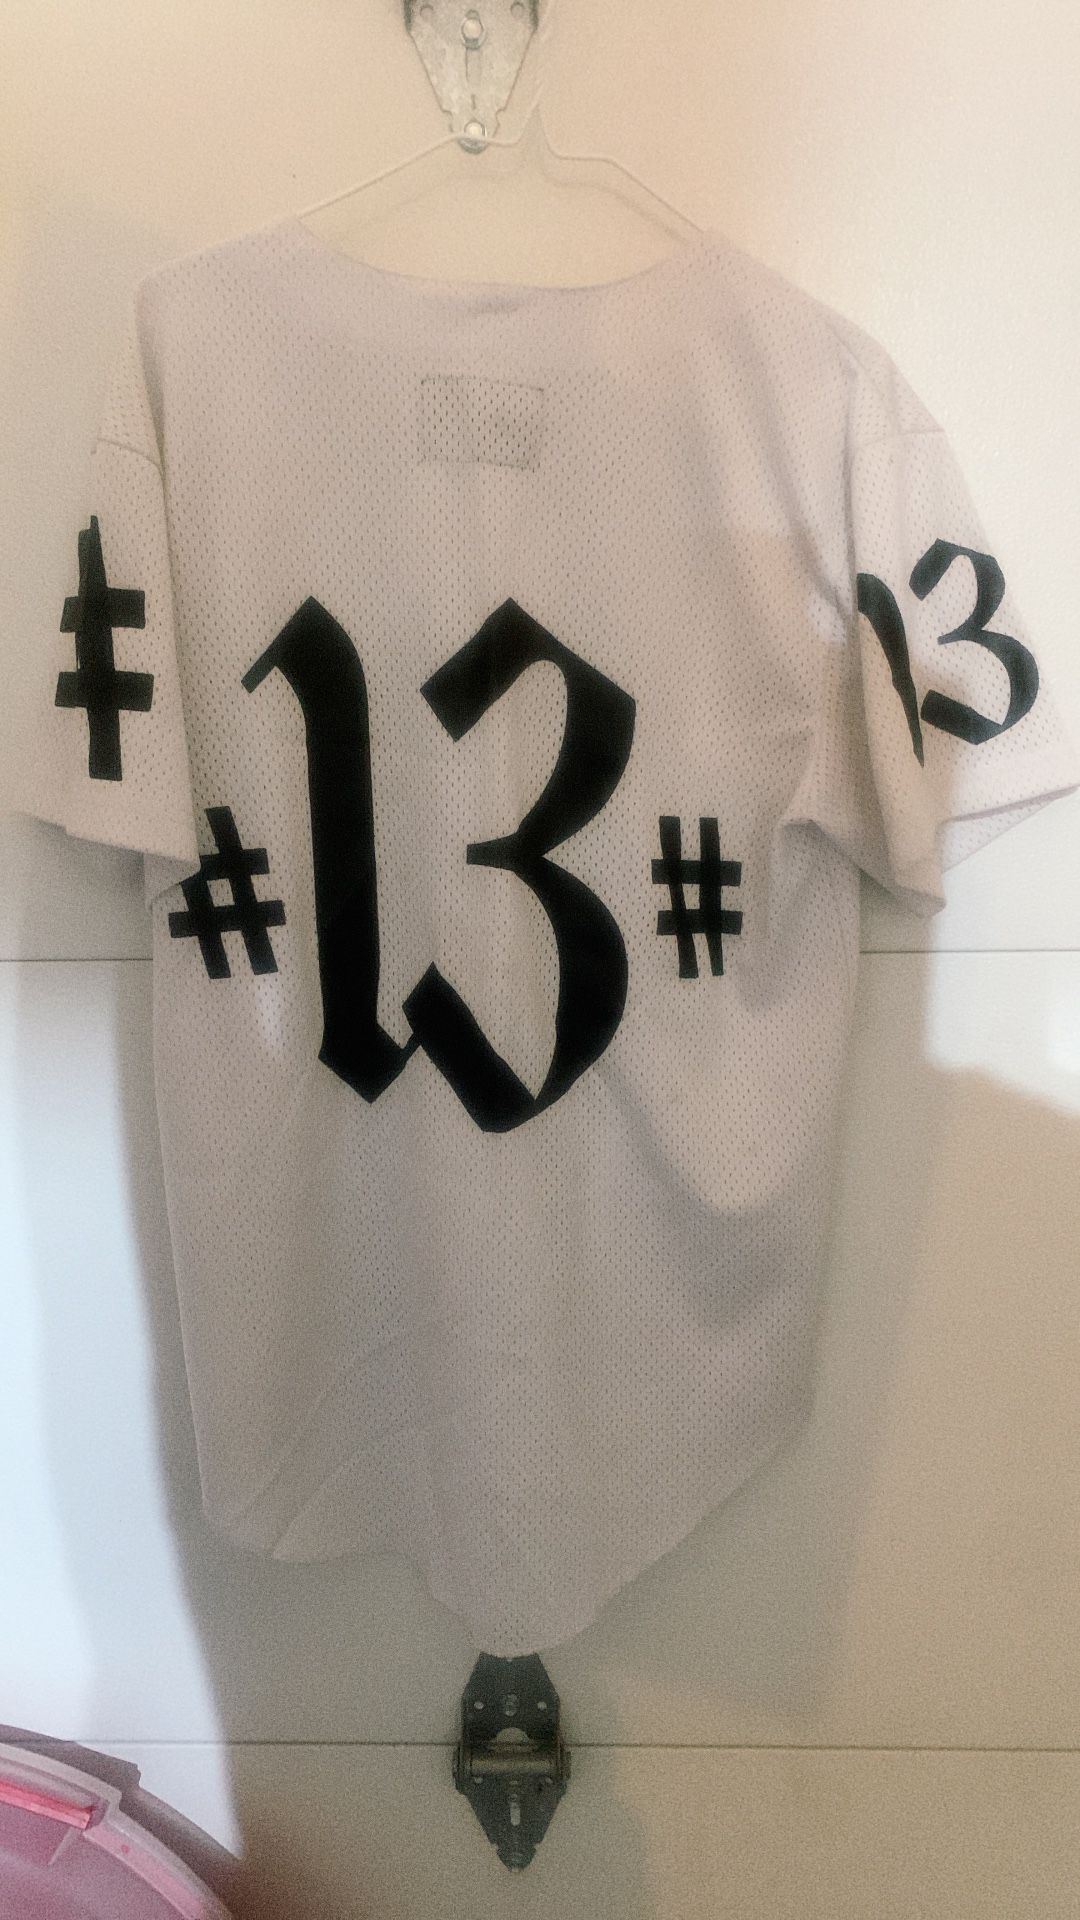 JERSEY   "13" IN SIZE   S